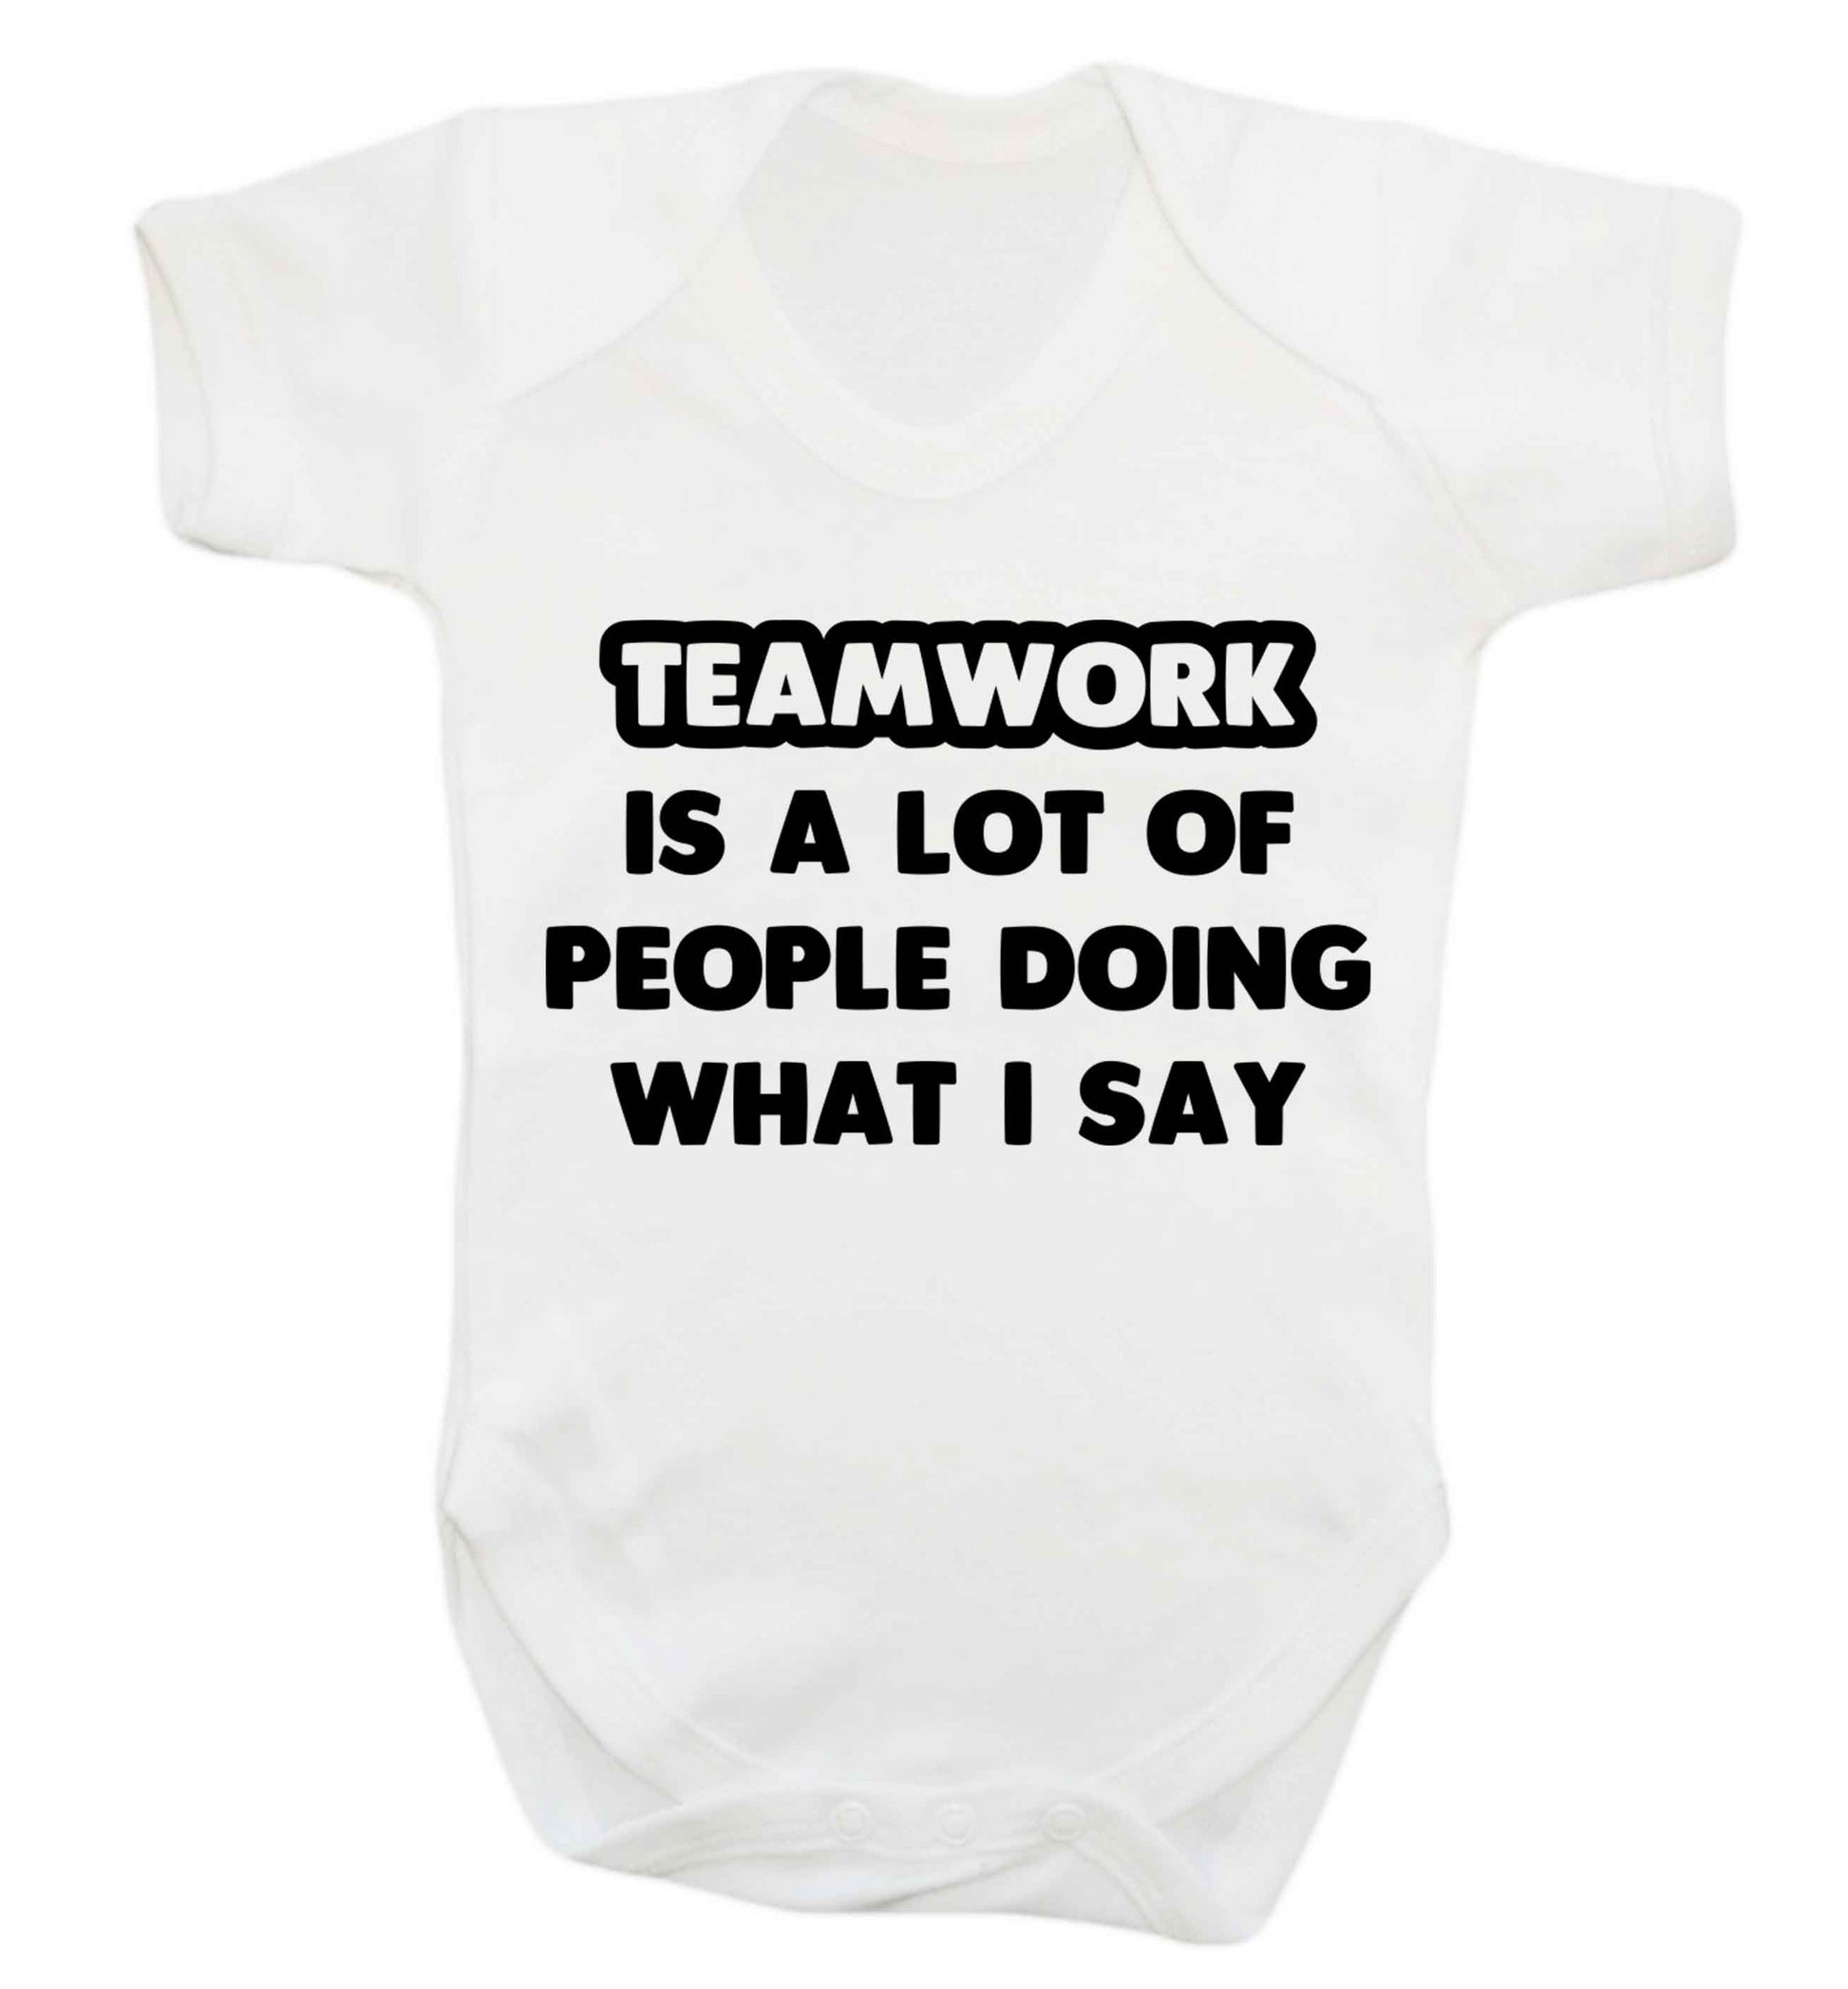 Teamwork is a lot of people doing what I say Baby Vest white 18-24 months